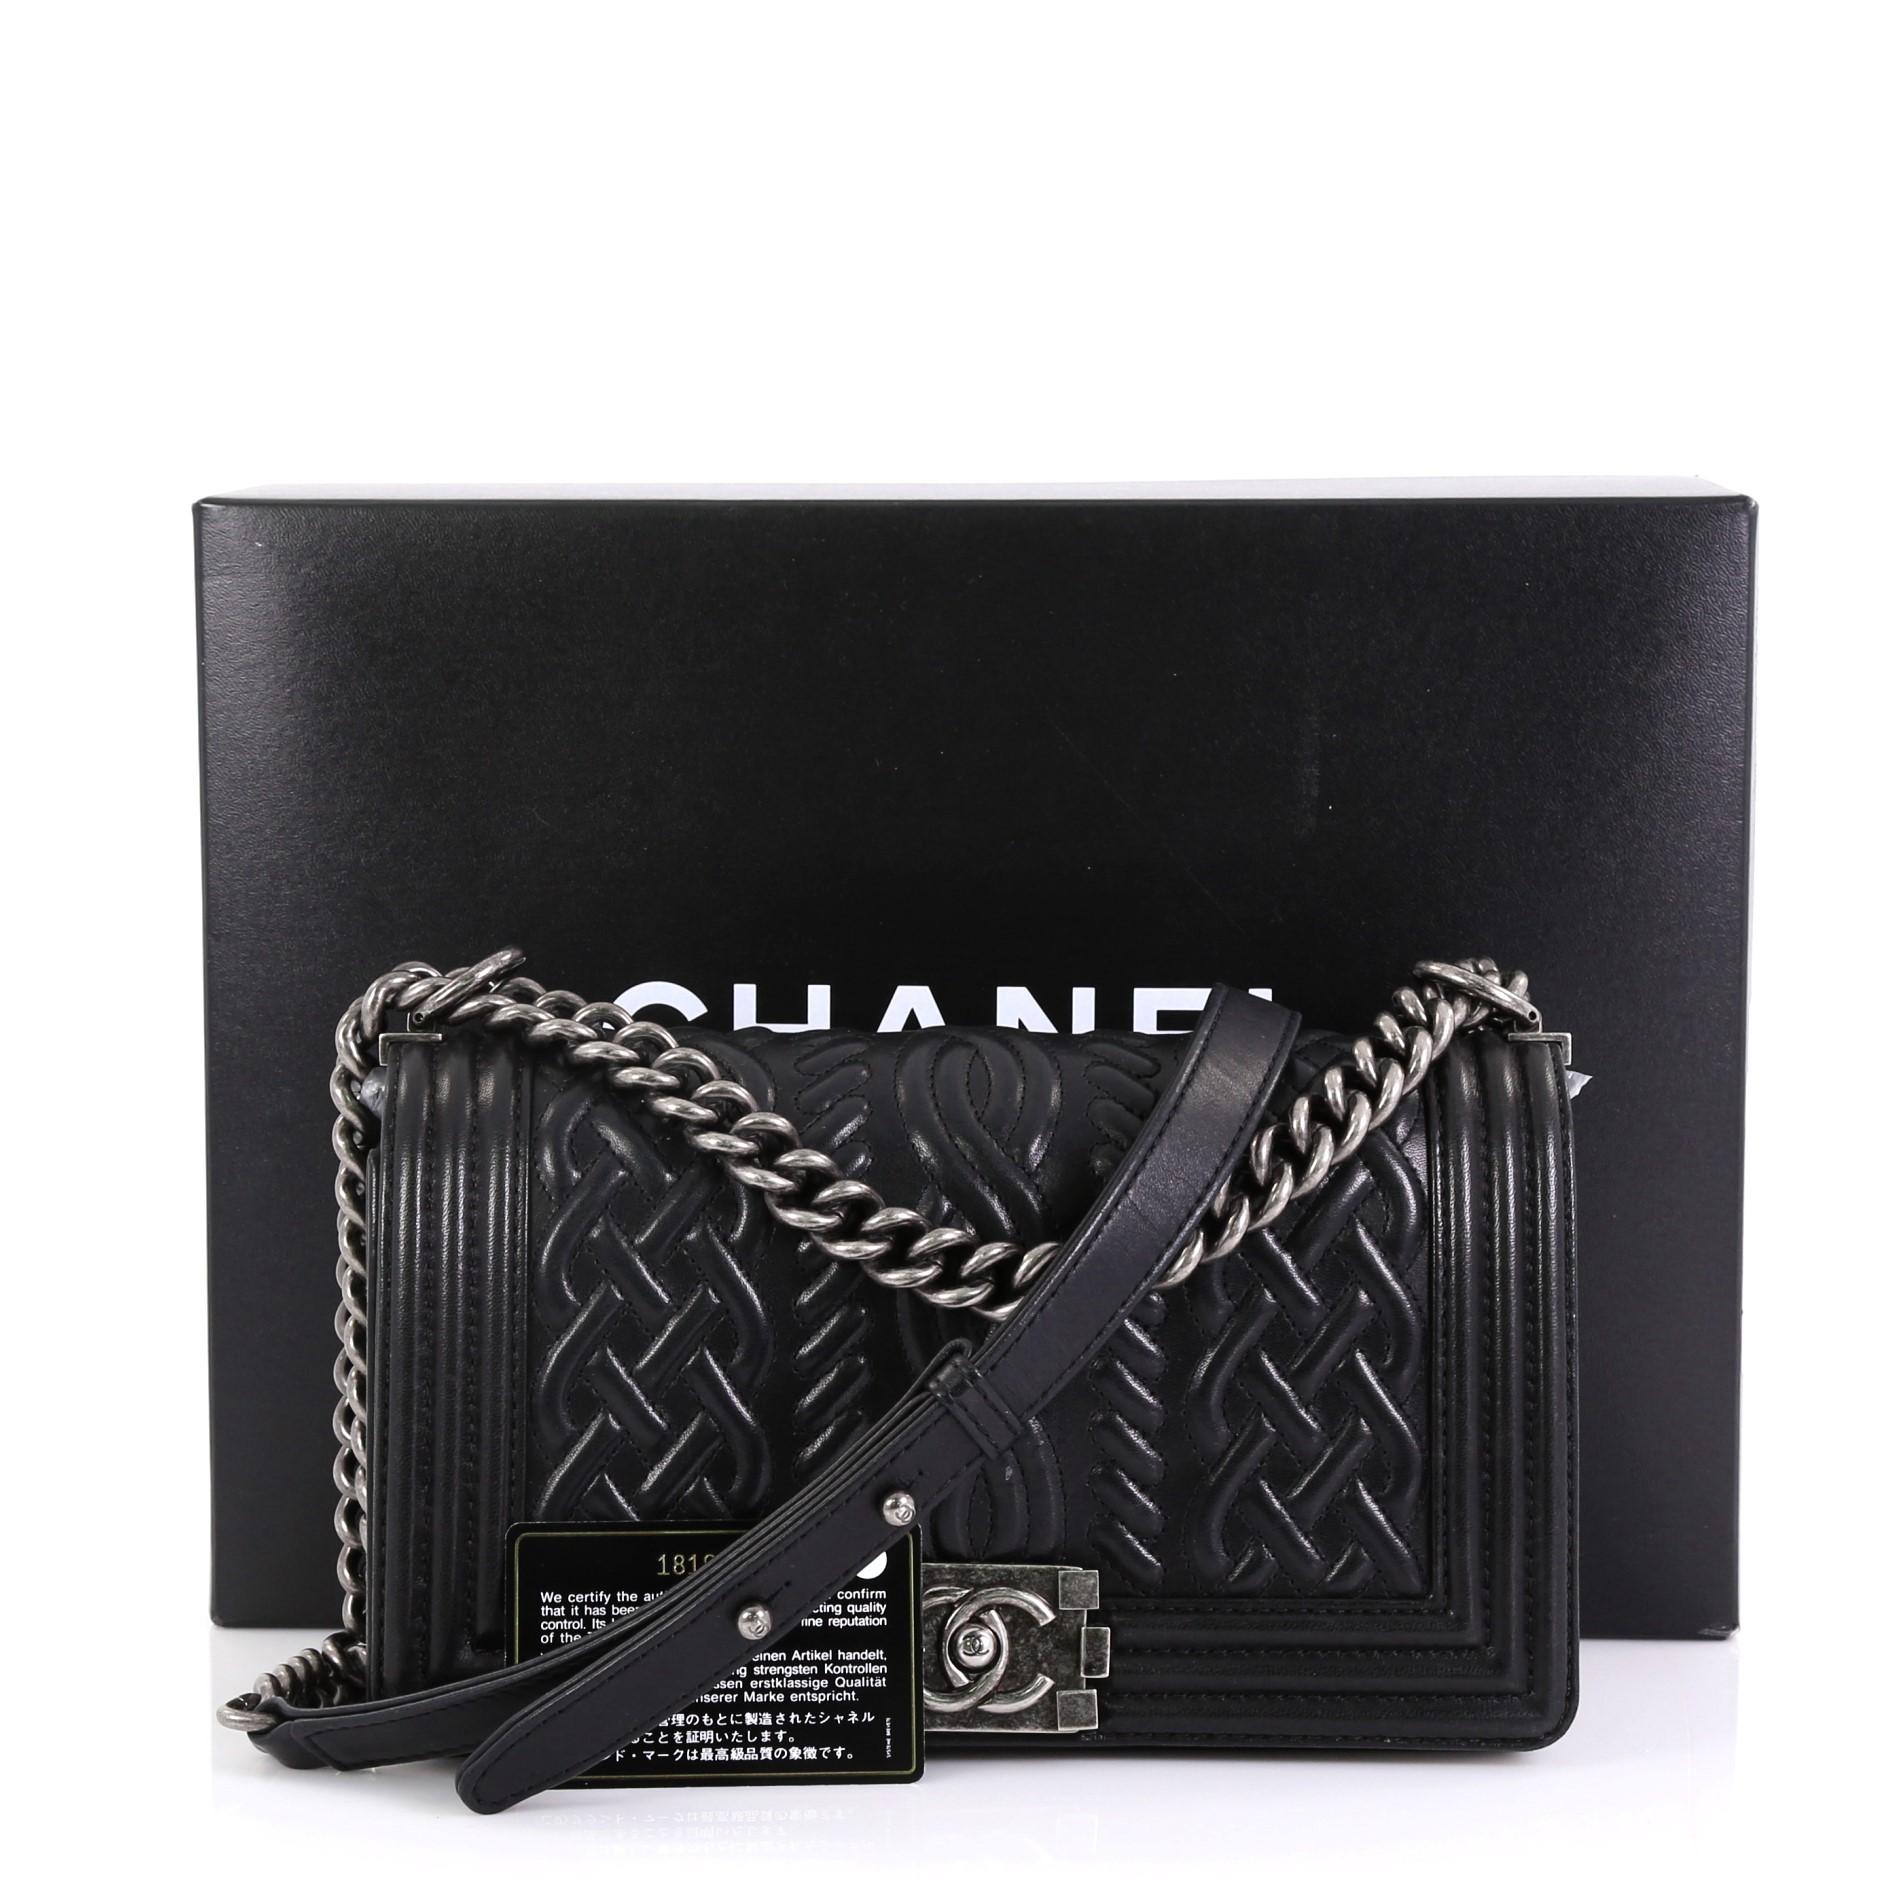 The Chanel Paris-Edinburgh Boy Flap Bag Celtic Knot Embossed Calfskin Old Medium, crafted with black celtic knot embossed calfskin, features chain link strap with leather pad and aged silver-tone hardware. Its CC Boy push-lock closure opens to a